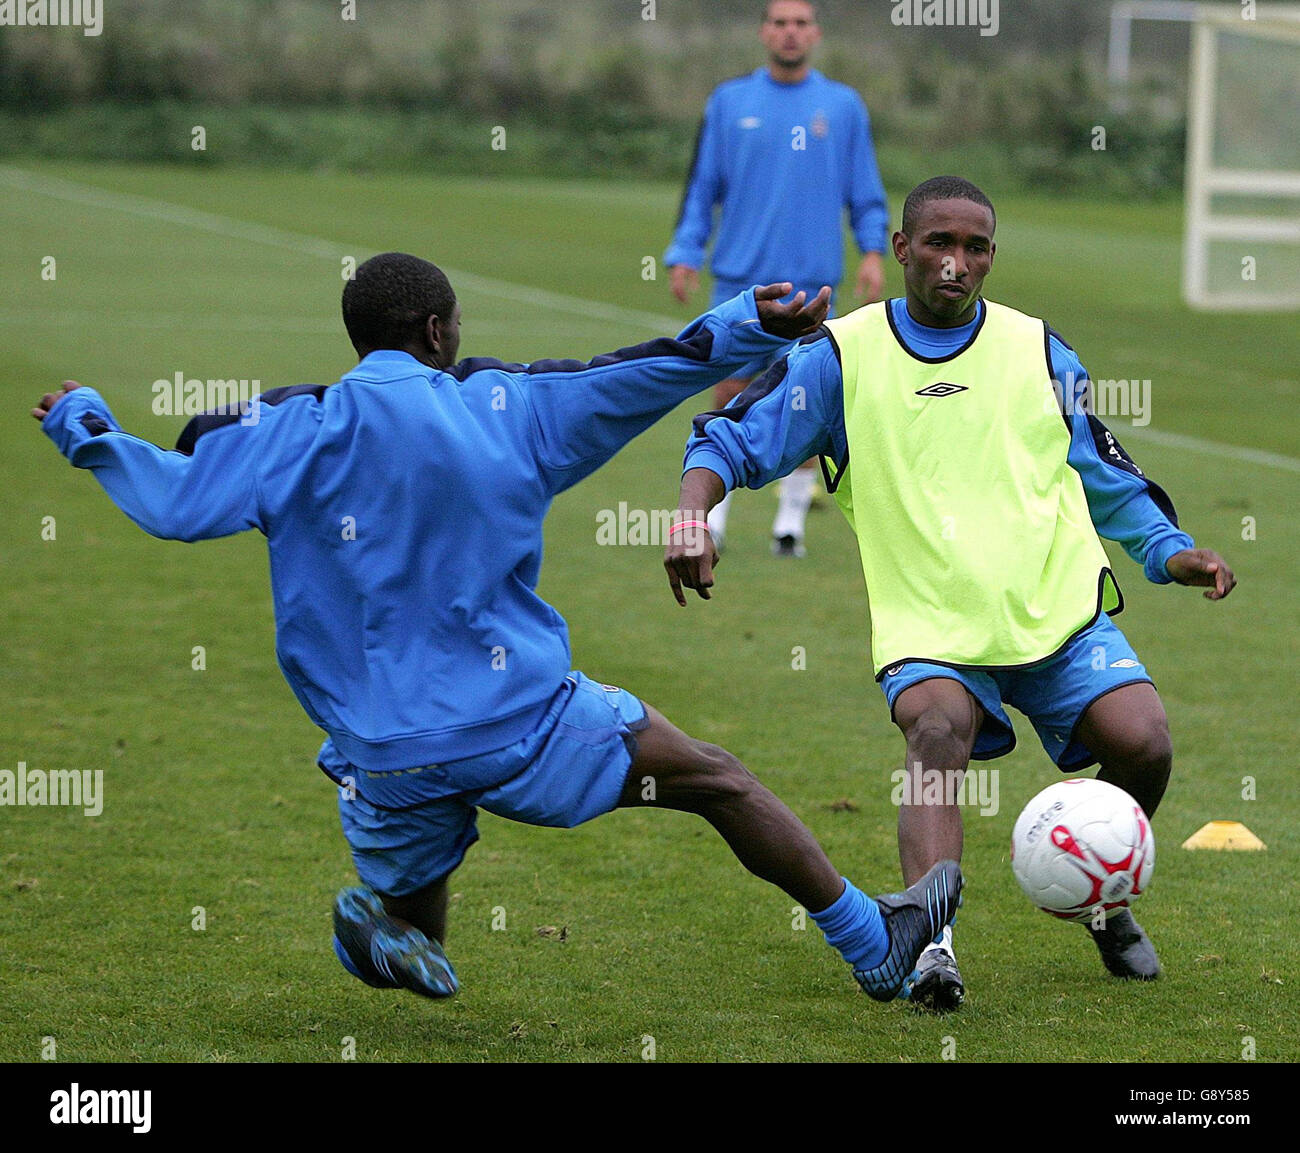 England's Jermain Defoe (R) is challenged by team-mate Shaun Wright-Phillips during a training session at Carrington Training Ground, Manchester, Tuesday October 4, 2005. England play Austria in their World Cup qualifying match on Saturday. PRESS ASSOCIATION Photo. Photo credit should read: Martin Rickett/PA. Stock Photo